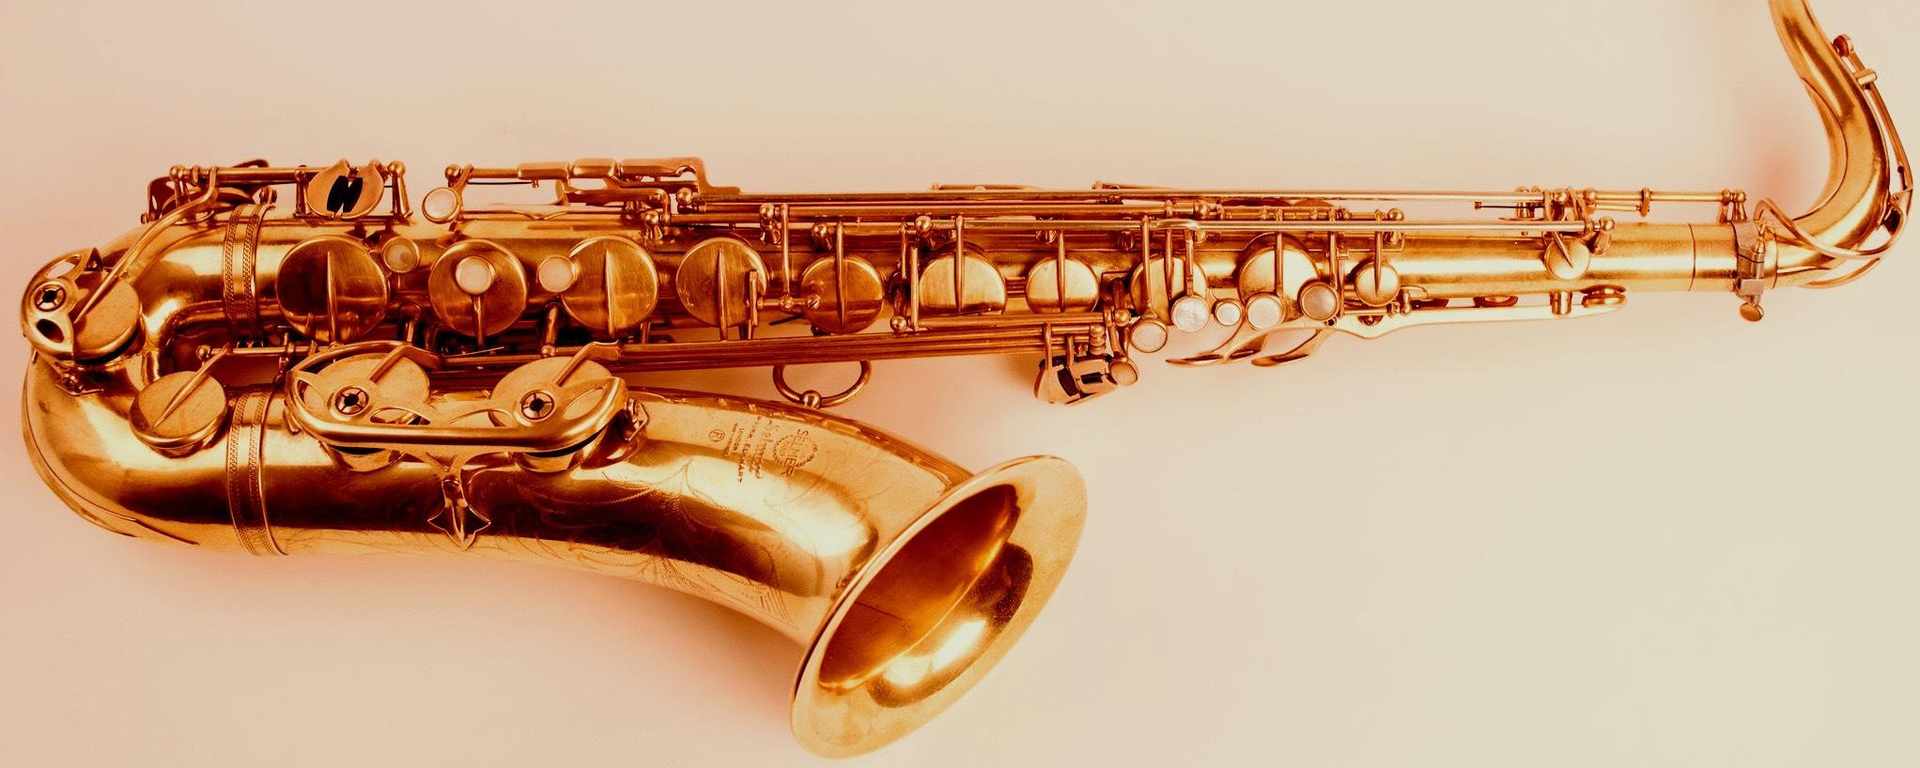 Discovering the Tenor saxophone